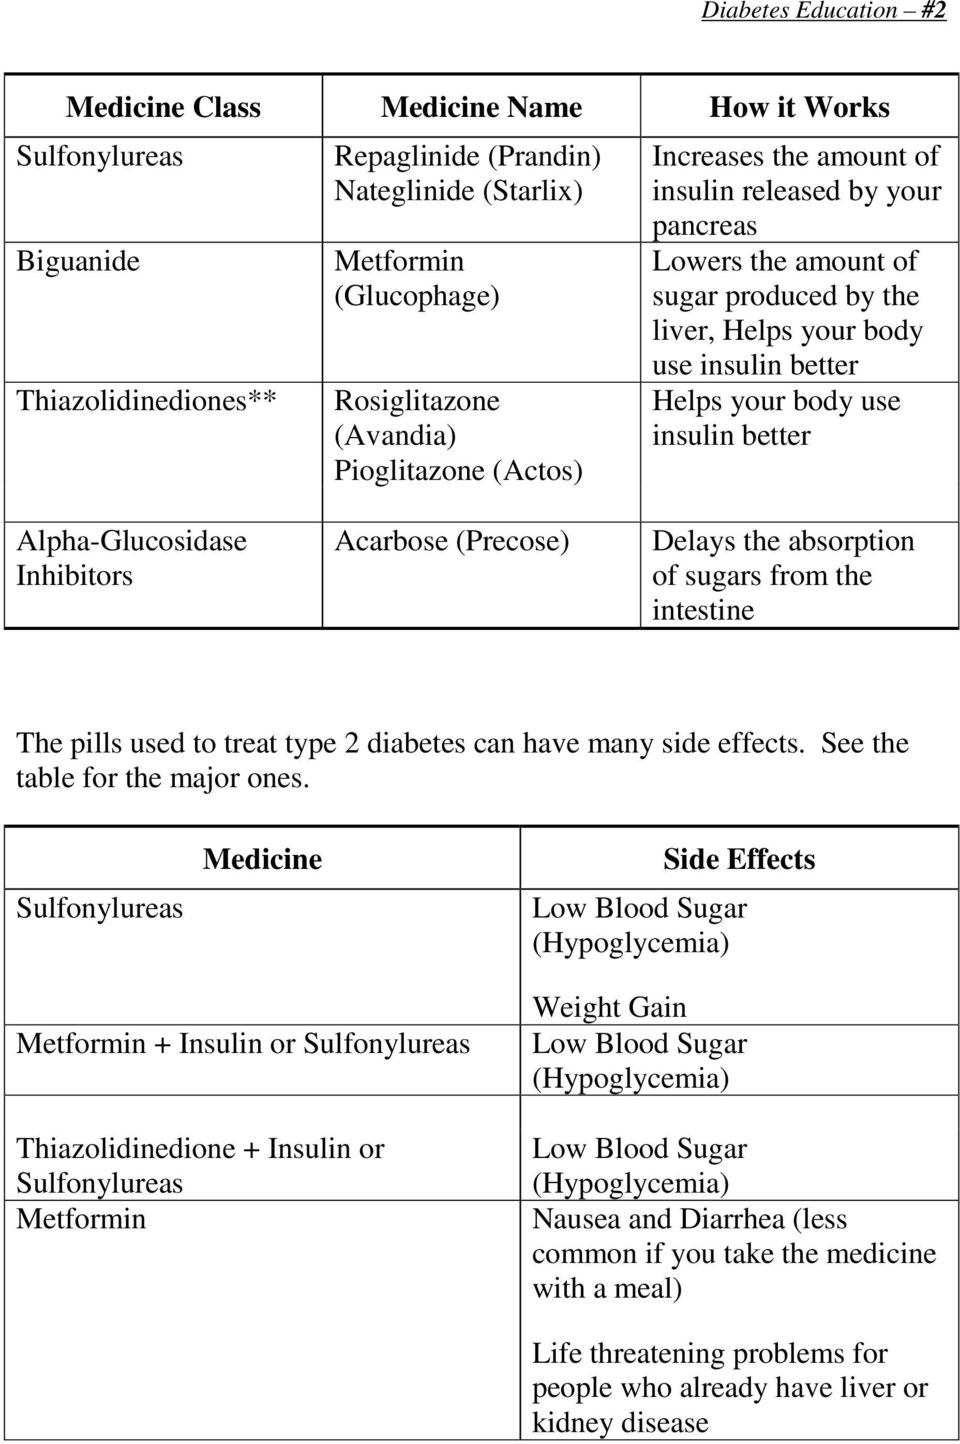 Inhibitors Acarbose (Precose) Delays the absorption of sugars from the intestine The pills used to treat type 2 diabetes can have many side effects. See the table for the major ones.